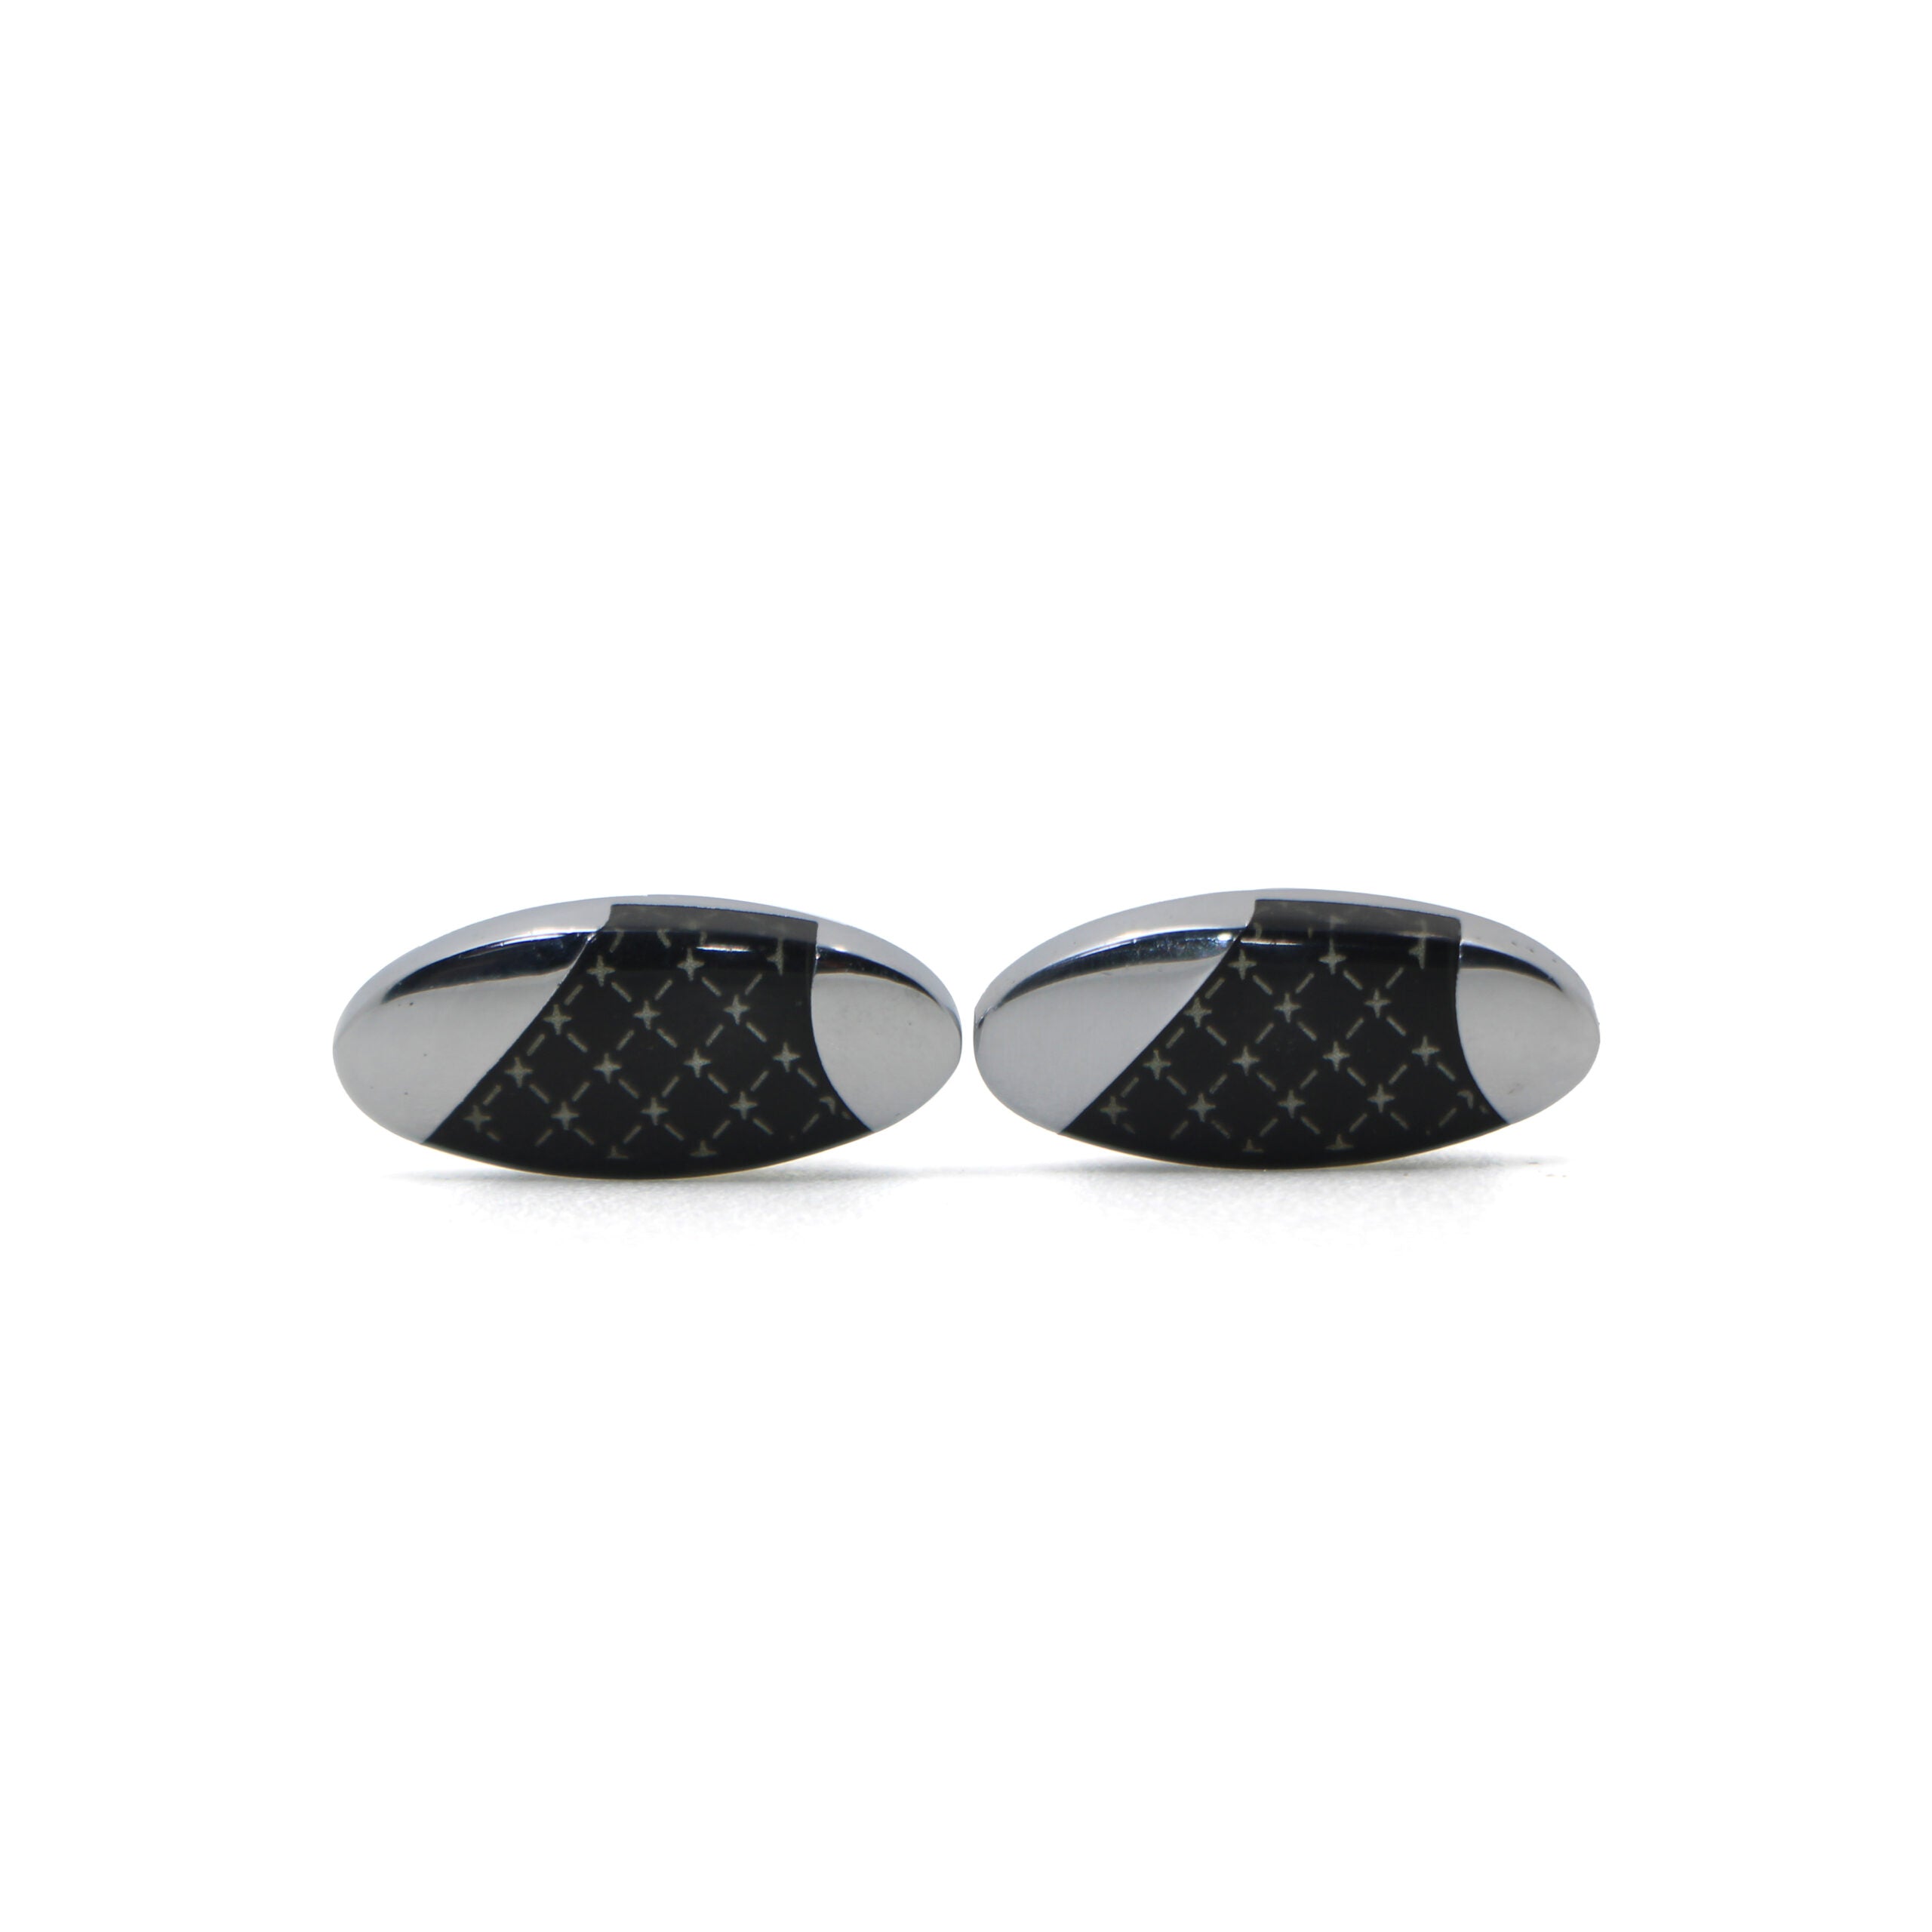 Vintage Cufflinks for Men's Shirt with a Gift Box - CU-1019